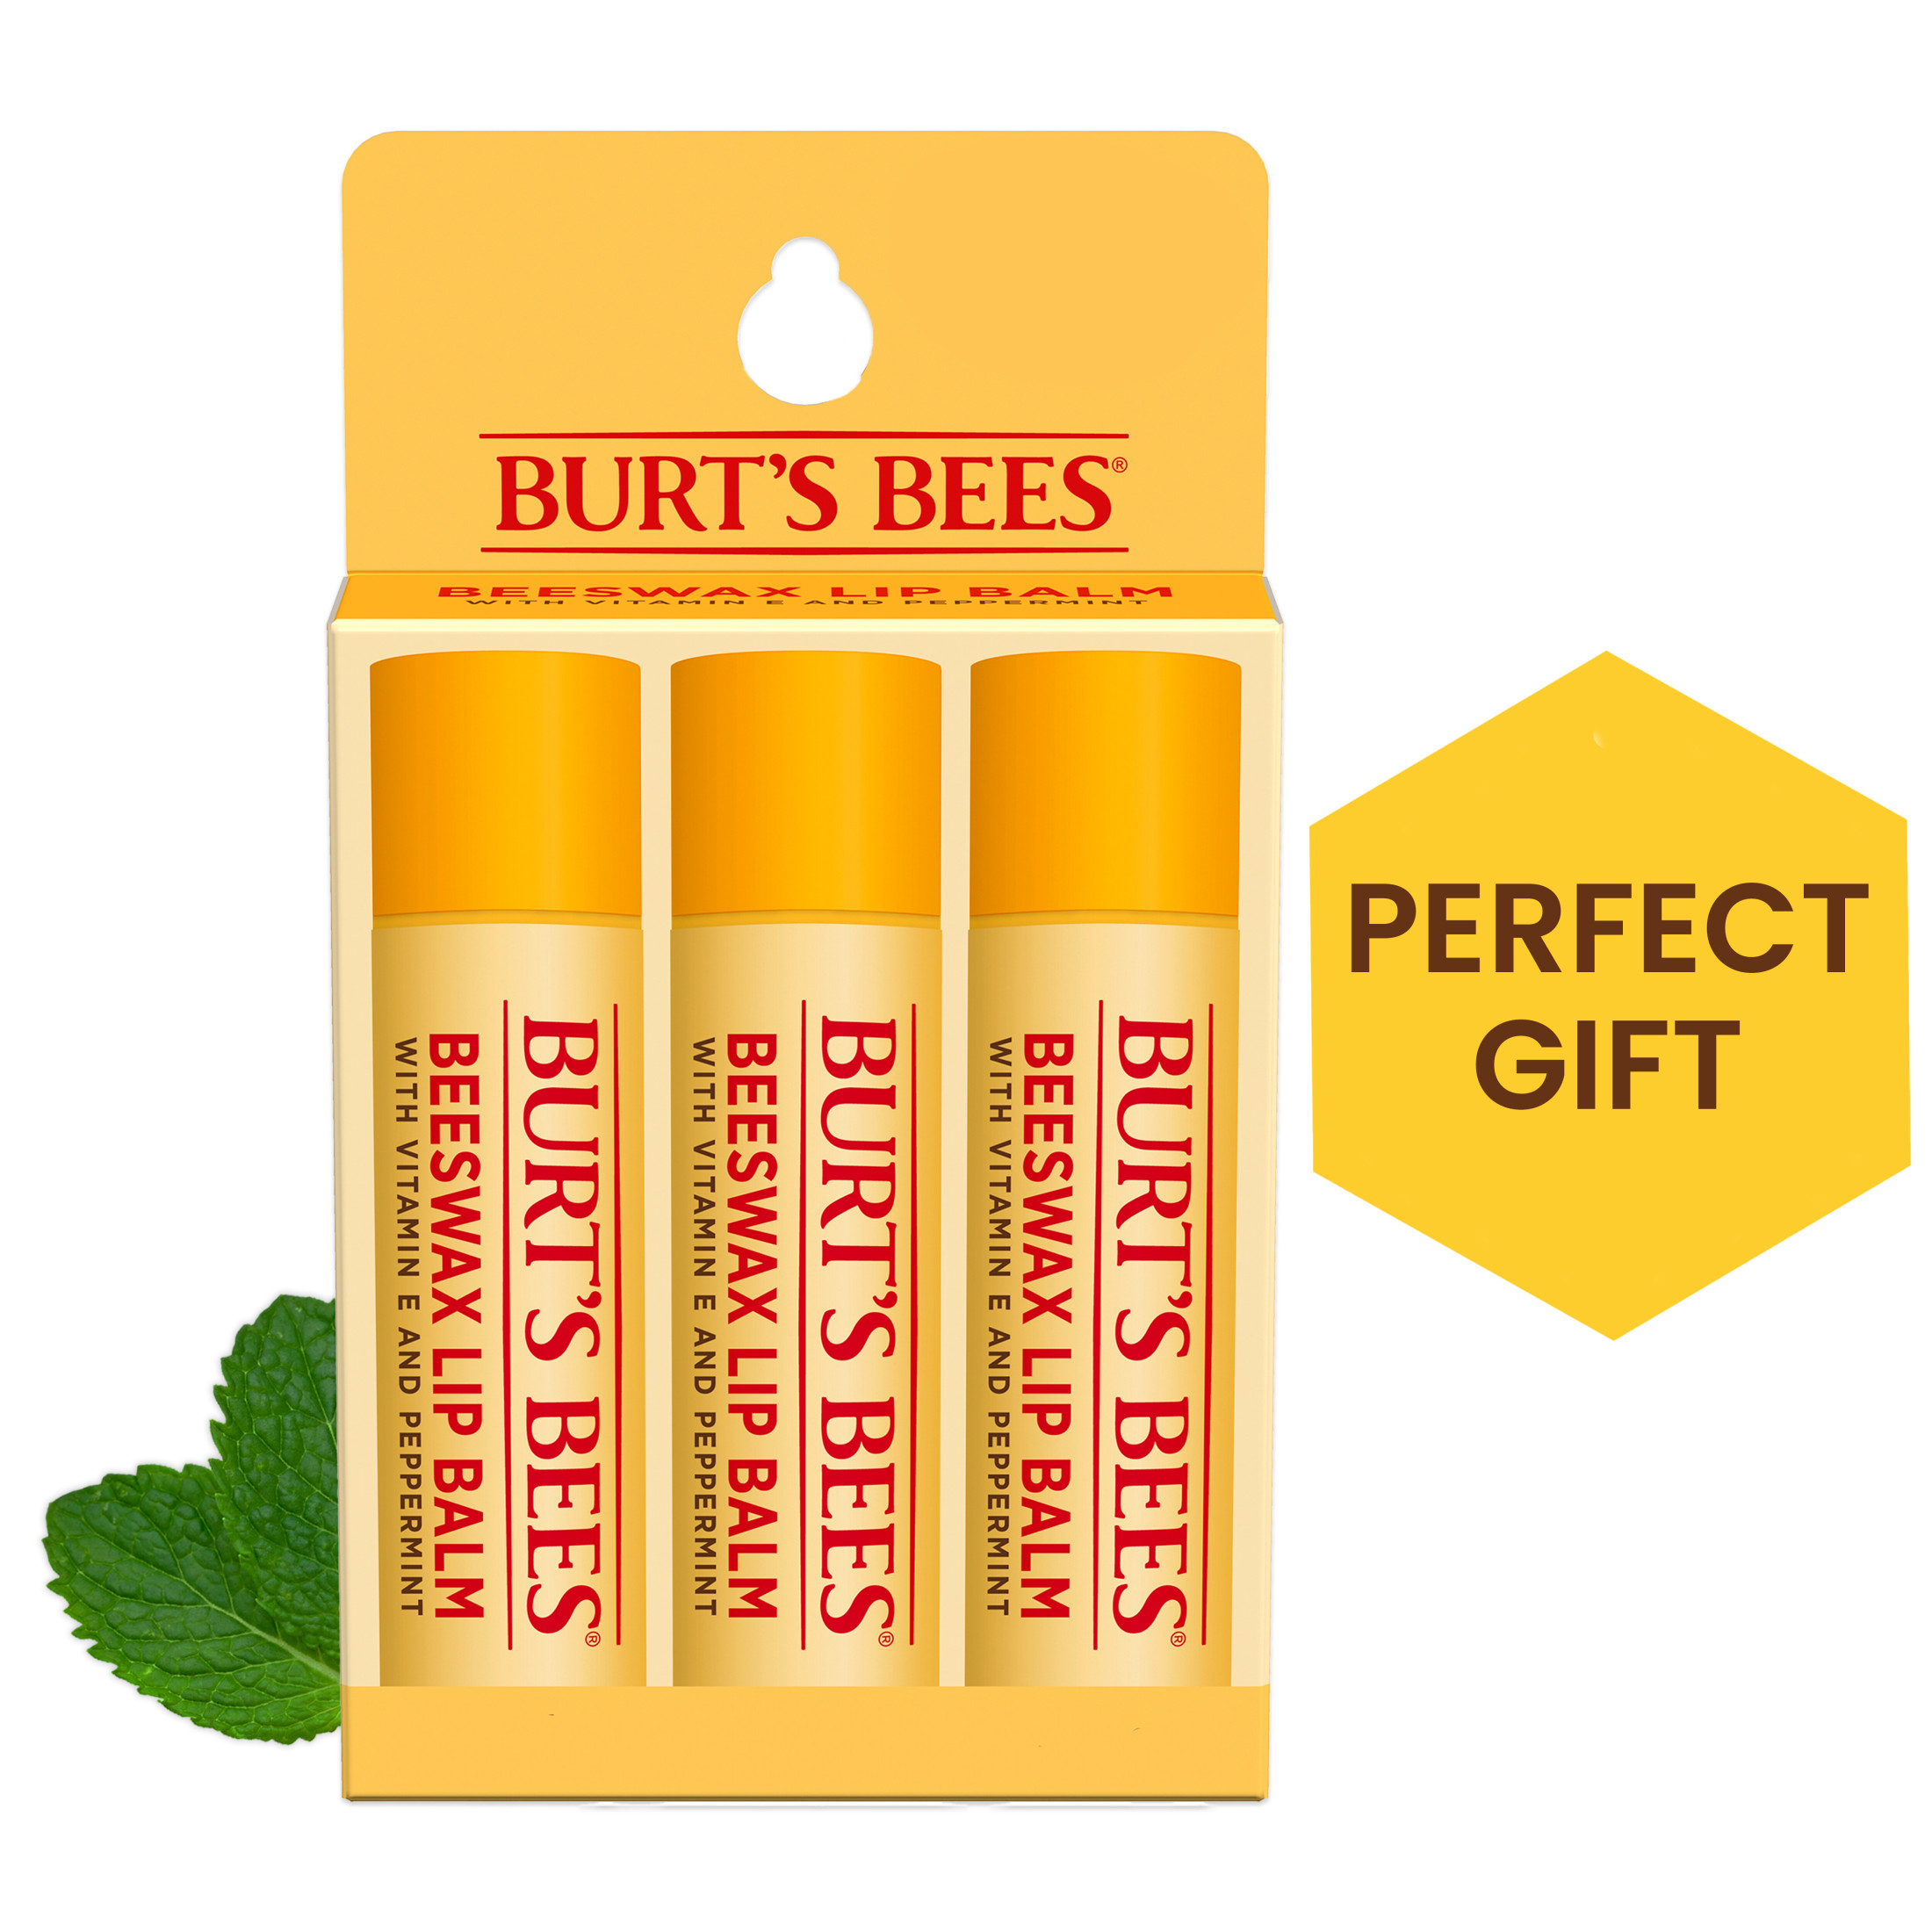 Burt's Bees 100% Natural Origin Moisturizing Lip Balm, with Beeswax, Vitamin E & Peppermint Oil, 3 Tubes - image 1 of 16